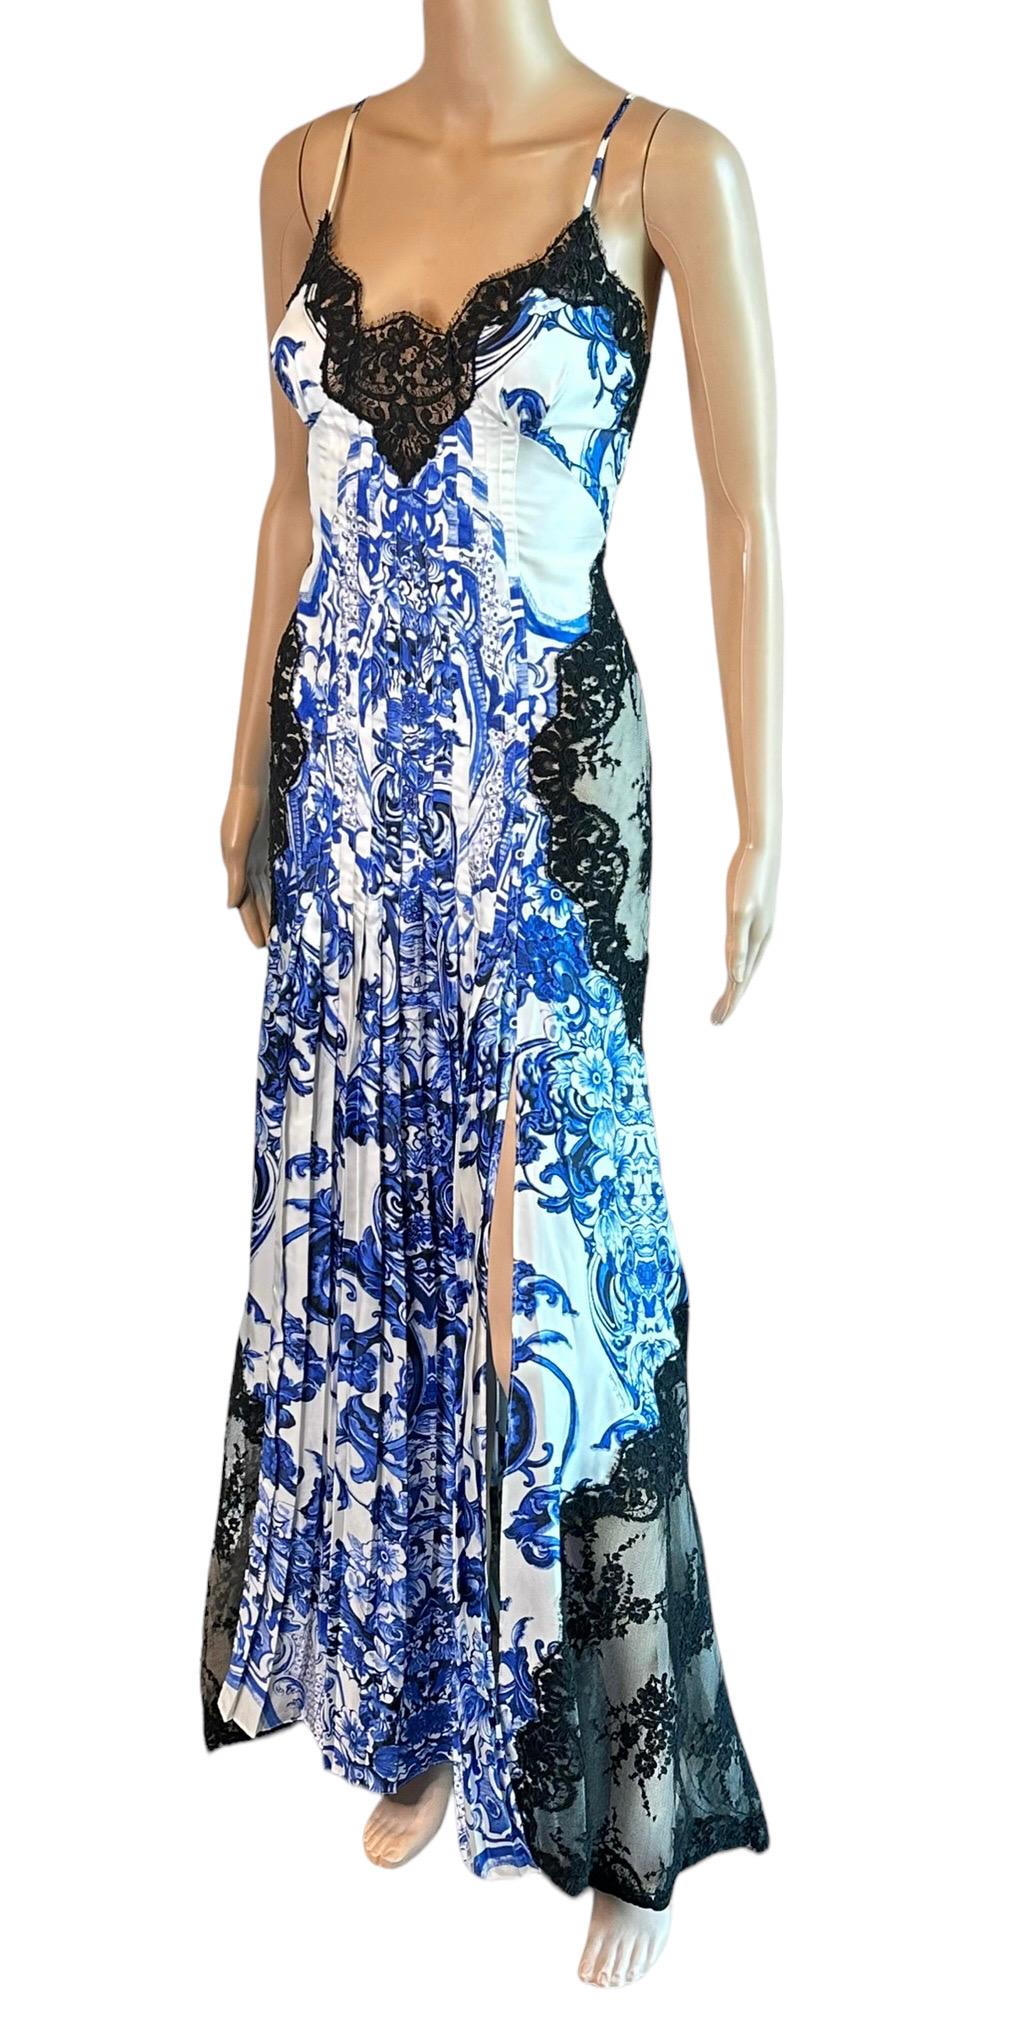 Roberto Cavalli Resort 2013 Chinoiserie Ming Porcelain Sheer Lace Evening Dress For Sale 3